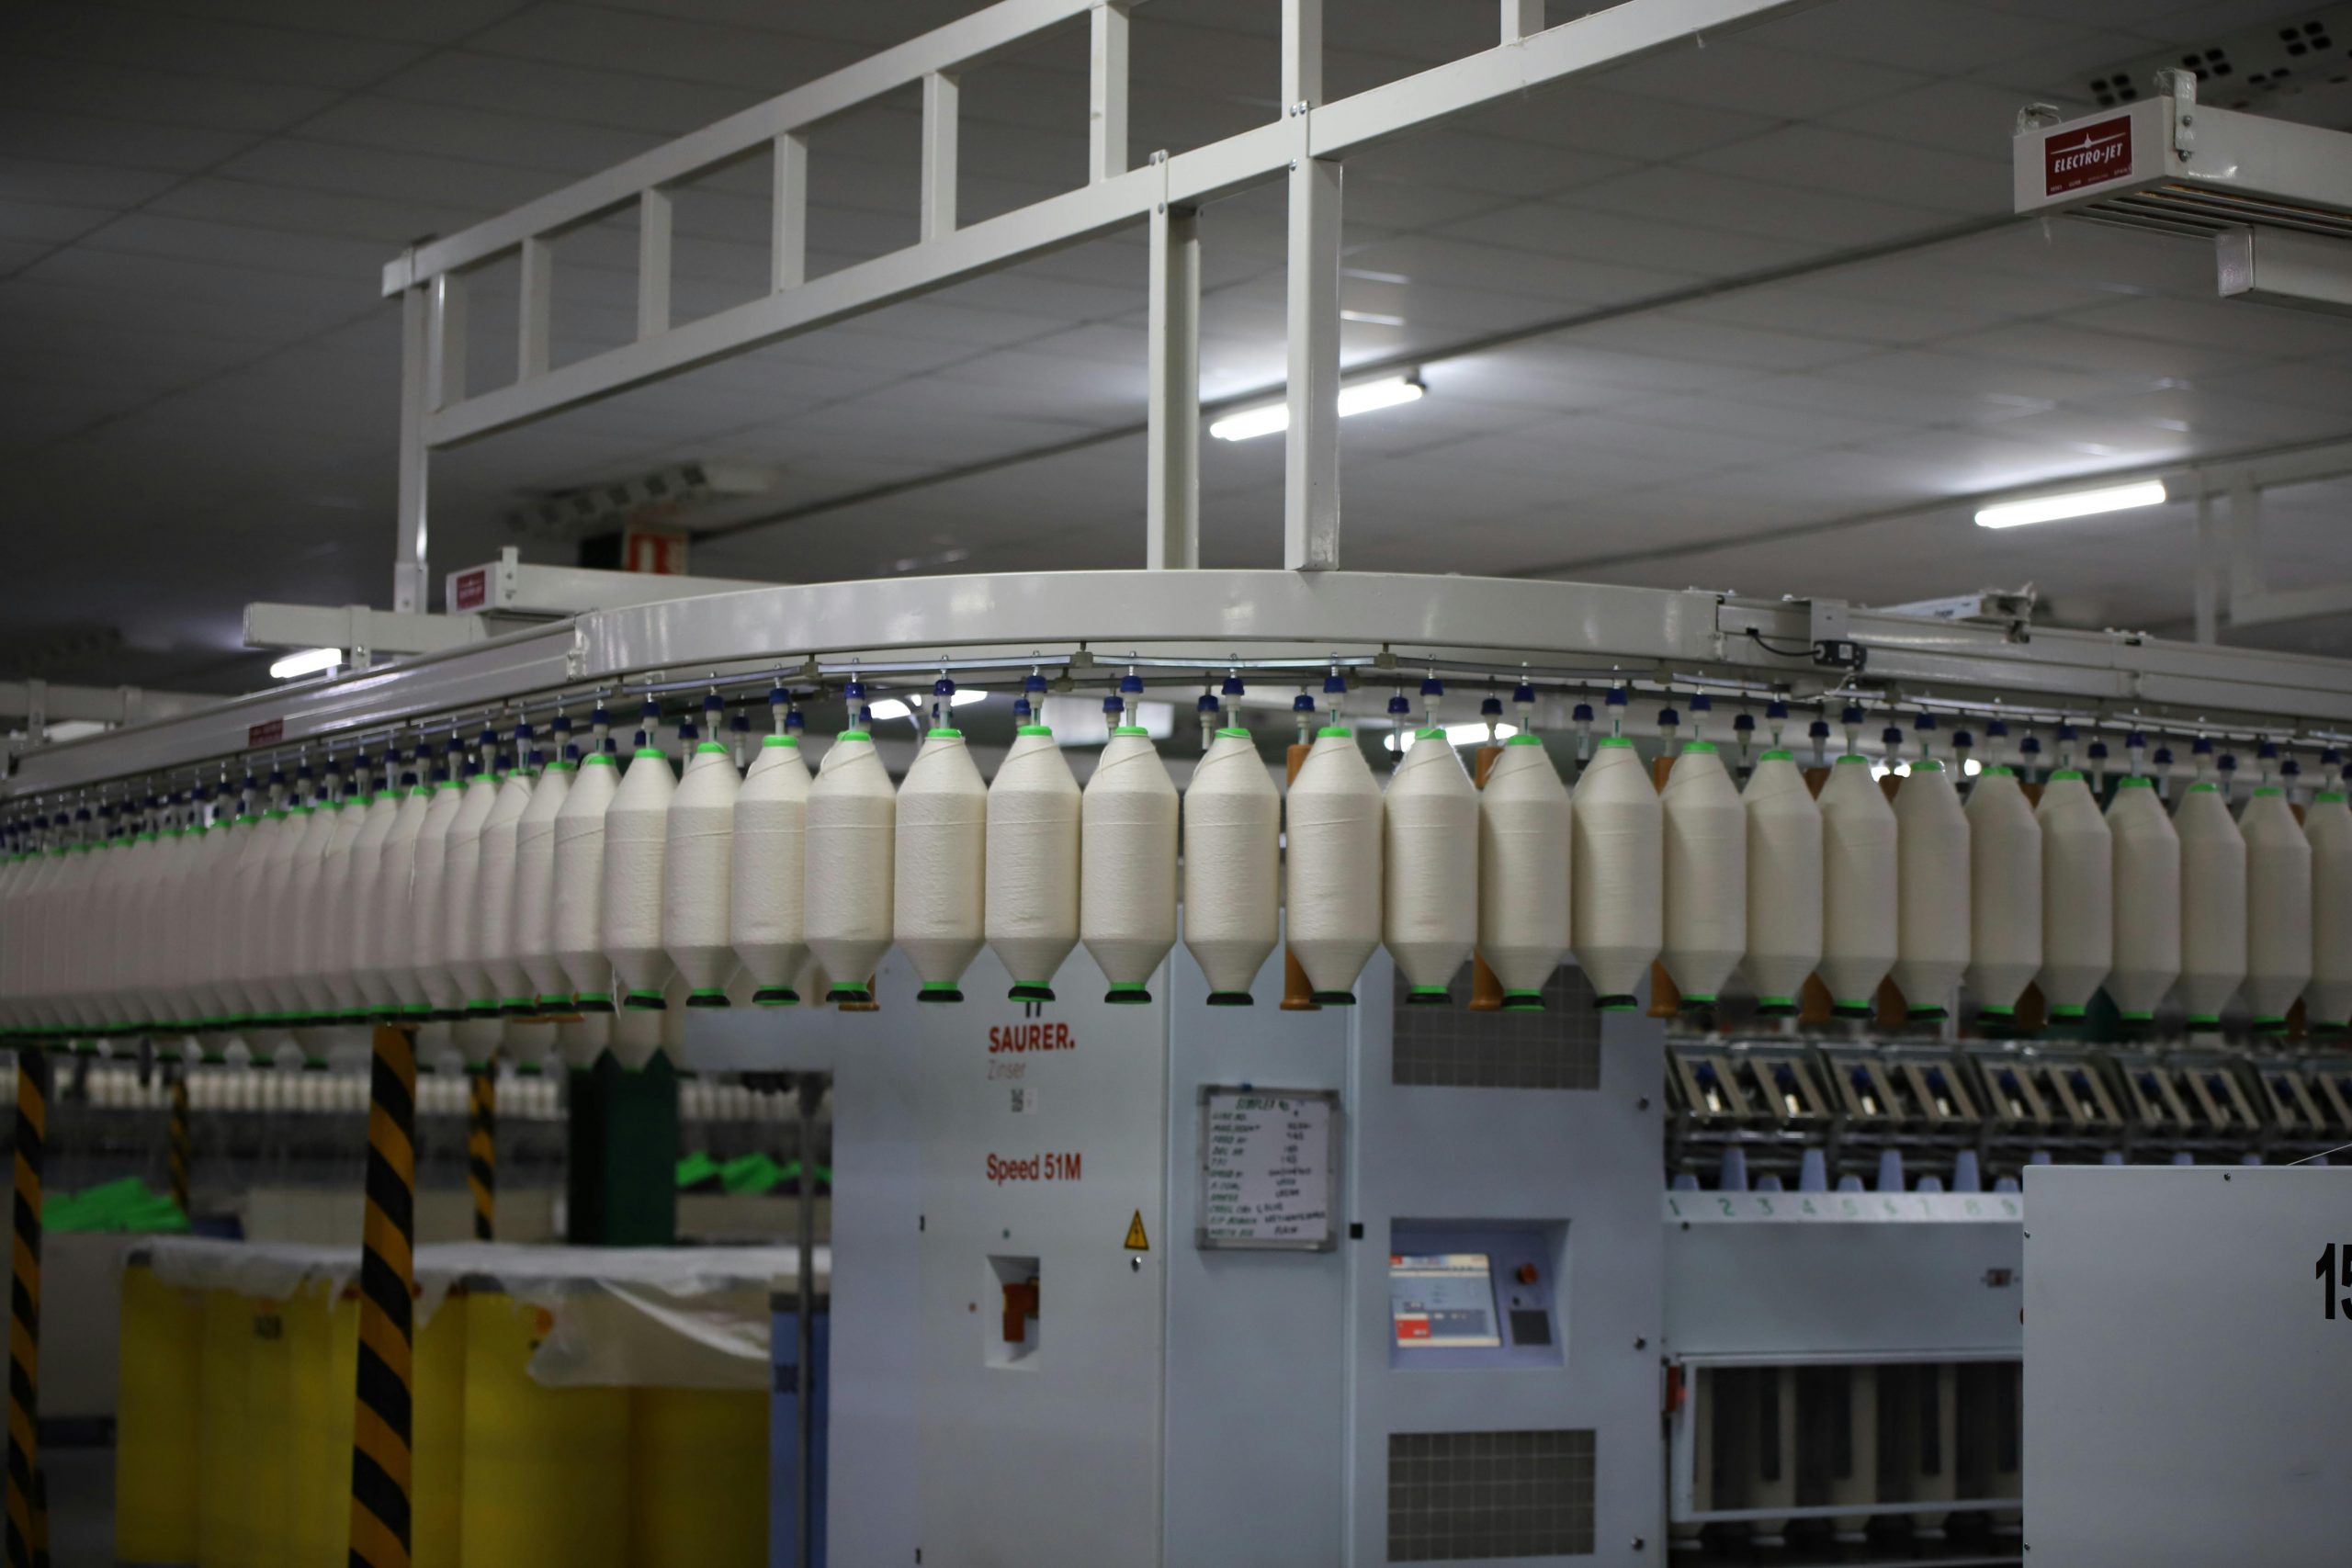 Conveyor belt with multiple pieces of yarn being produced.